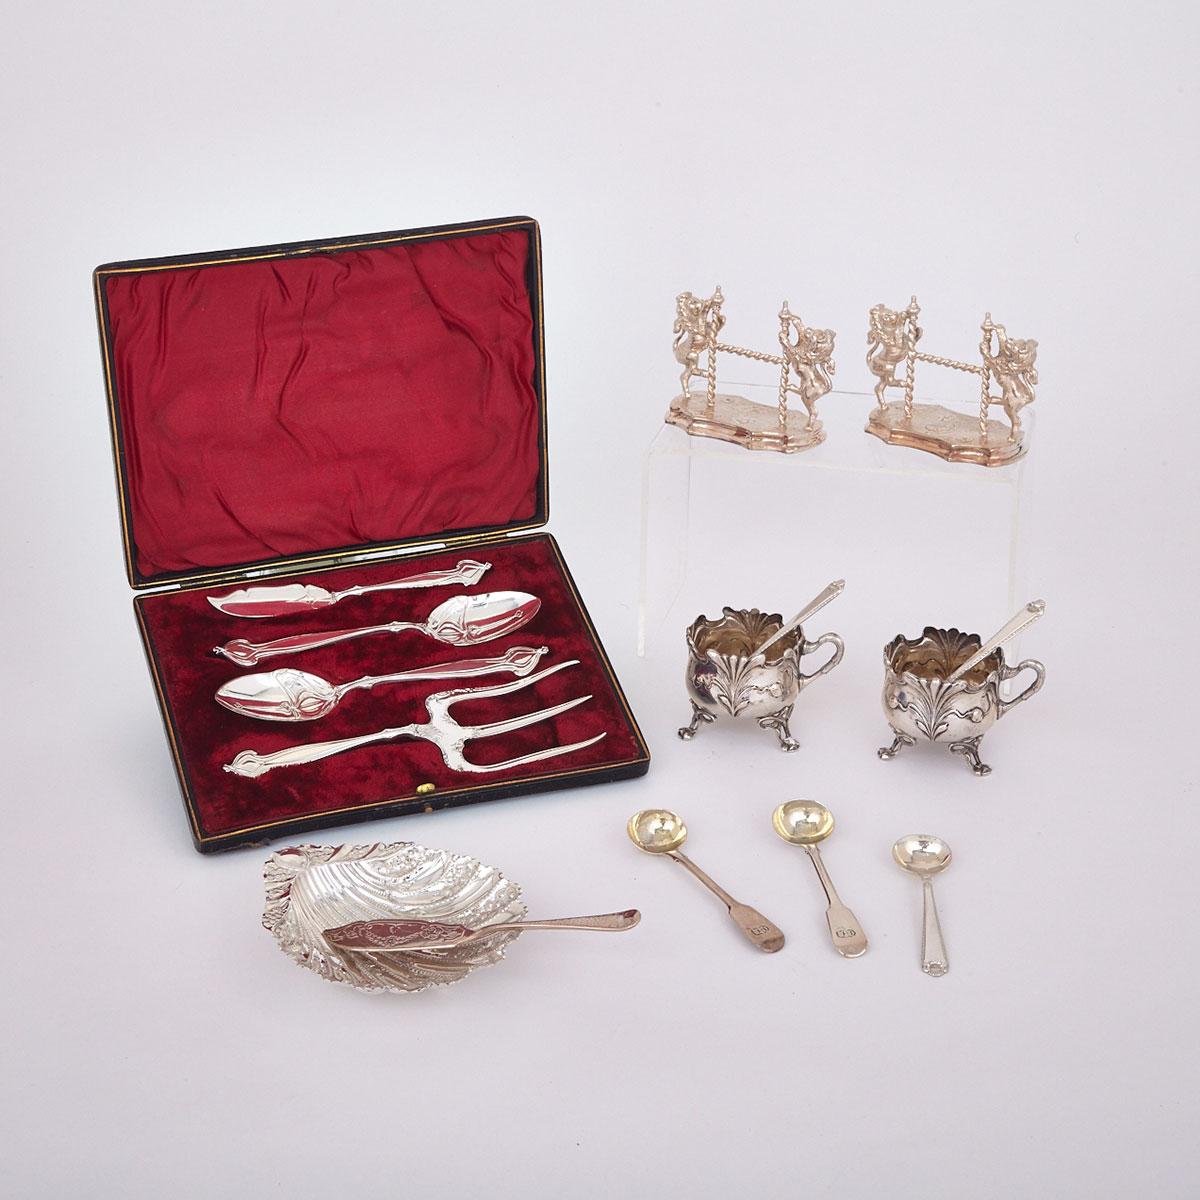 Group of Silver and Silver Plated Articles, 19th/20th century